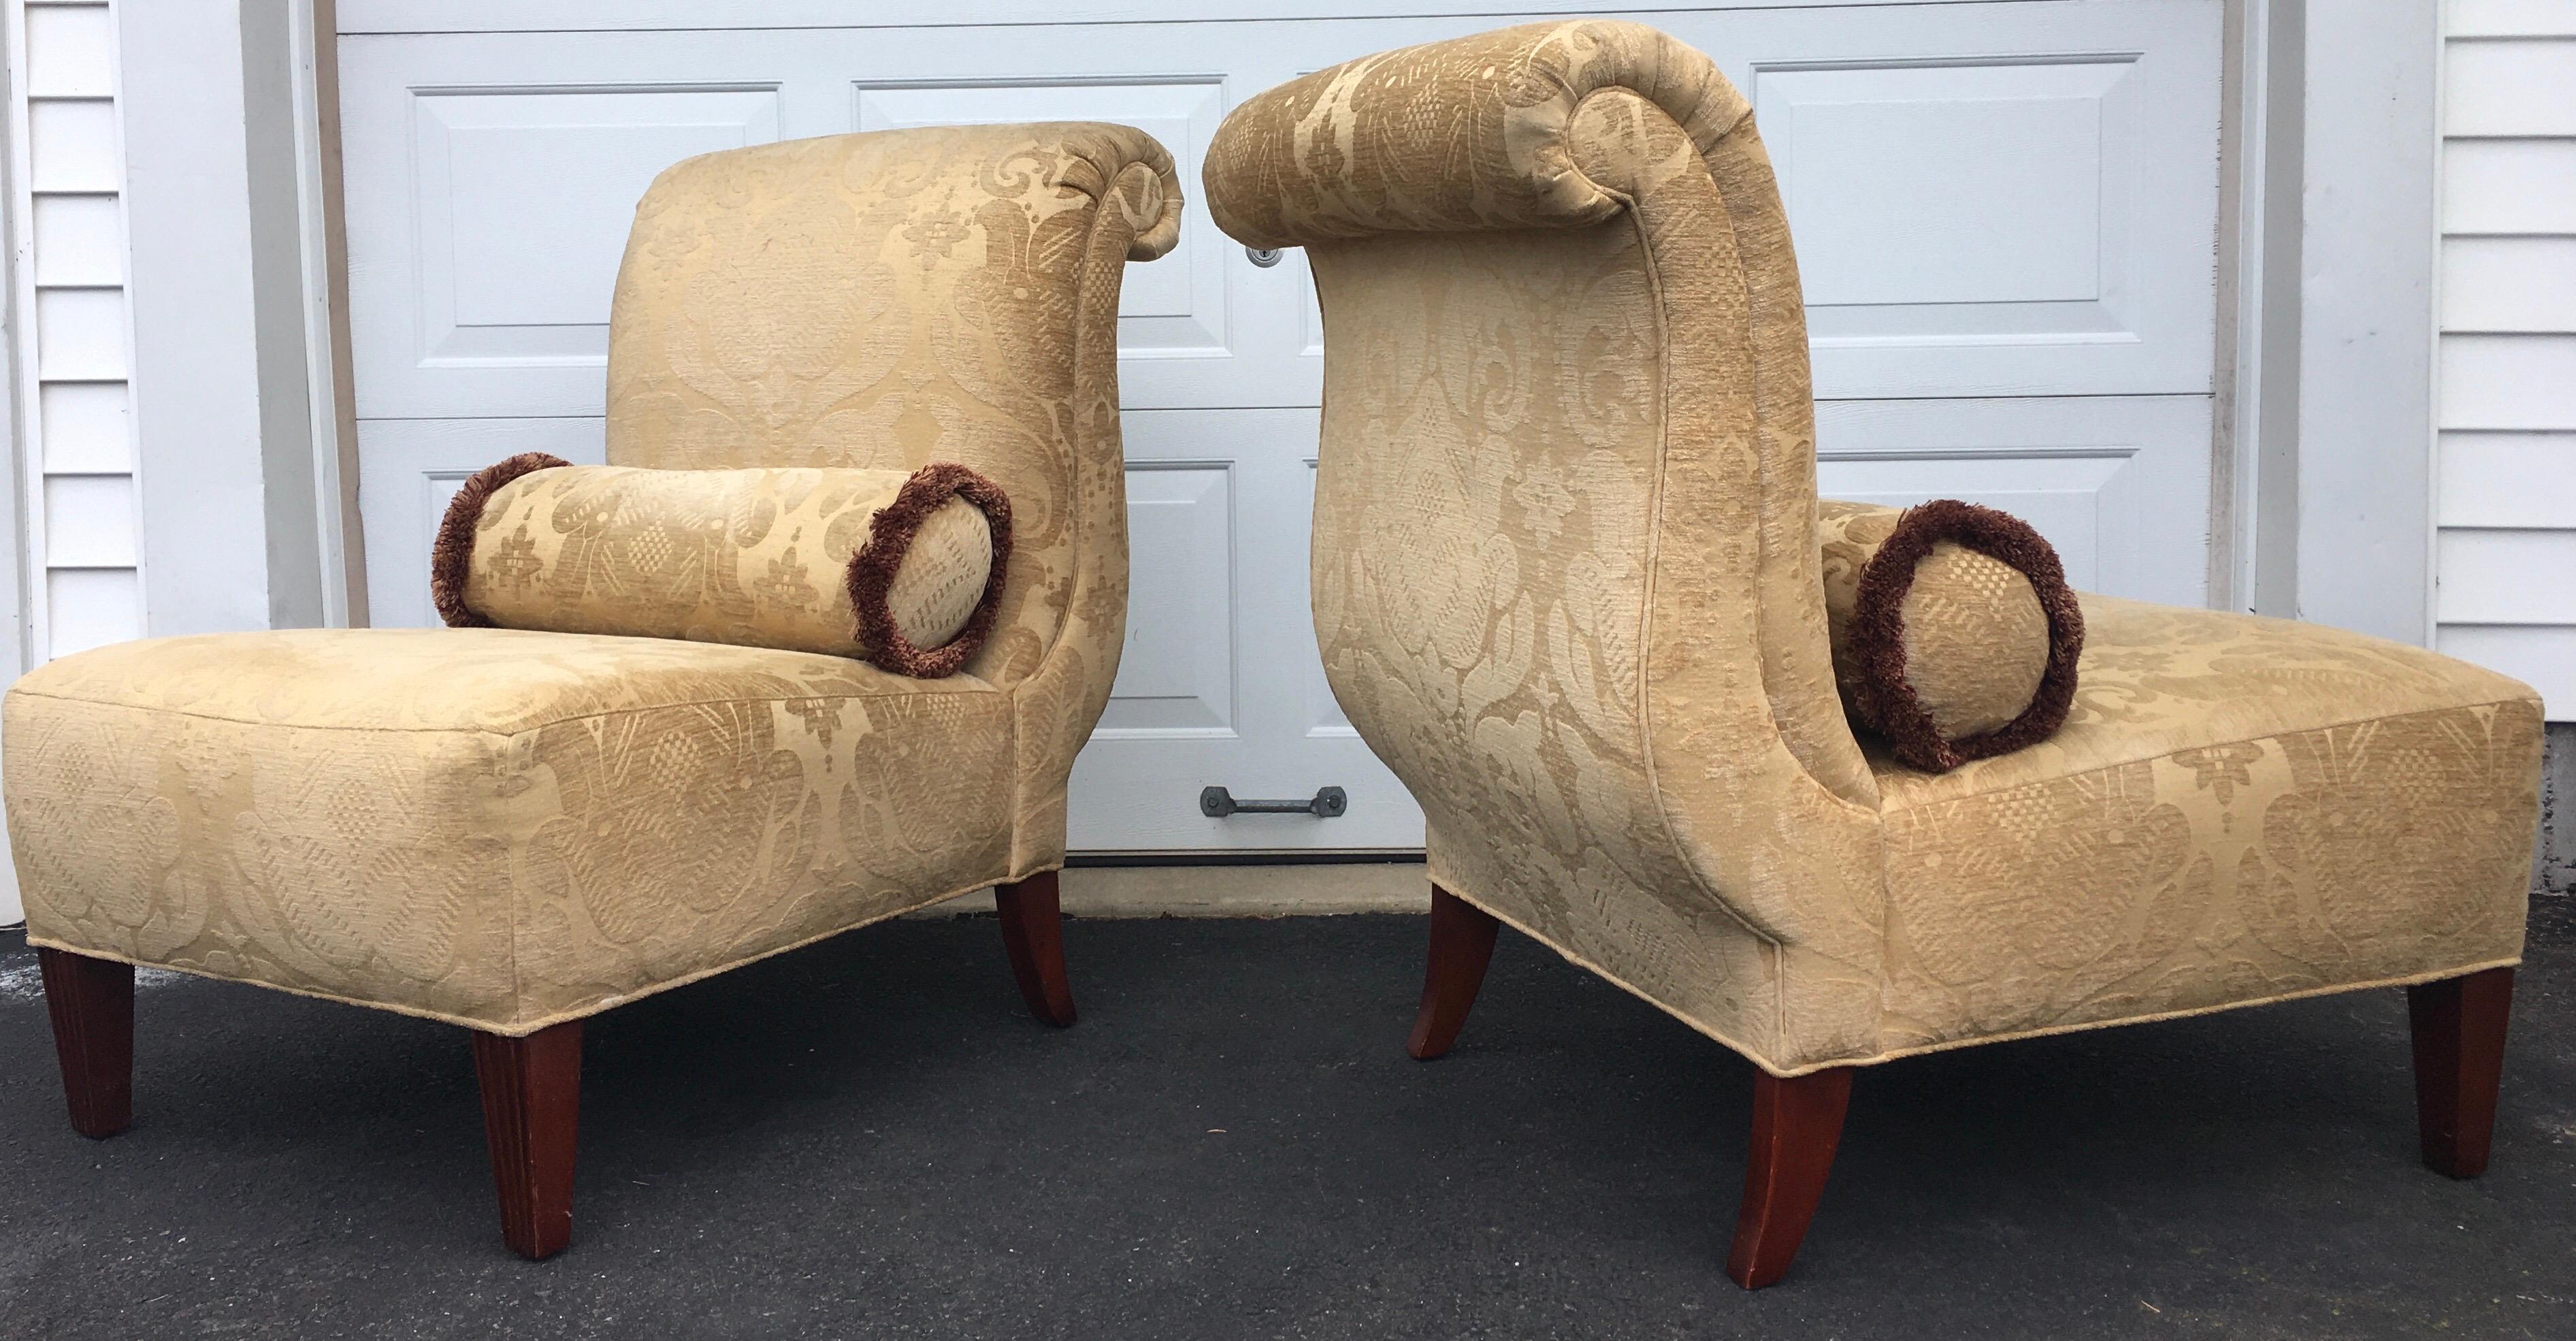 Pair of 1940s-inspired roll-back upholstered slipper lounge chairs by Barbara Barry for Baker Furniture. Sculptural curved frames feature heavy weight gold damask fabric with coordinating brush fringe trimmed bolster pillows and fluted front legs.  